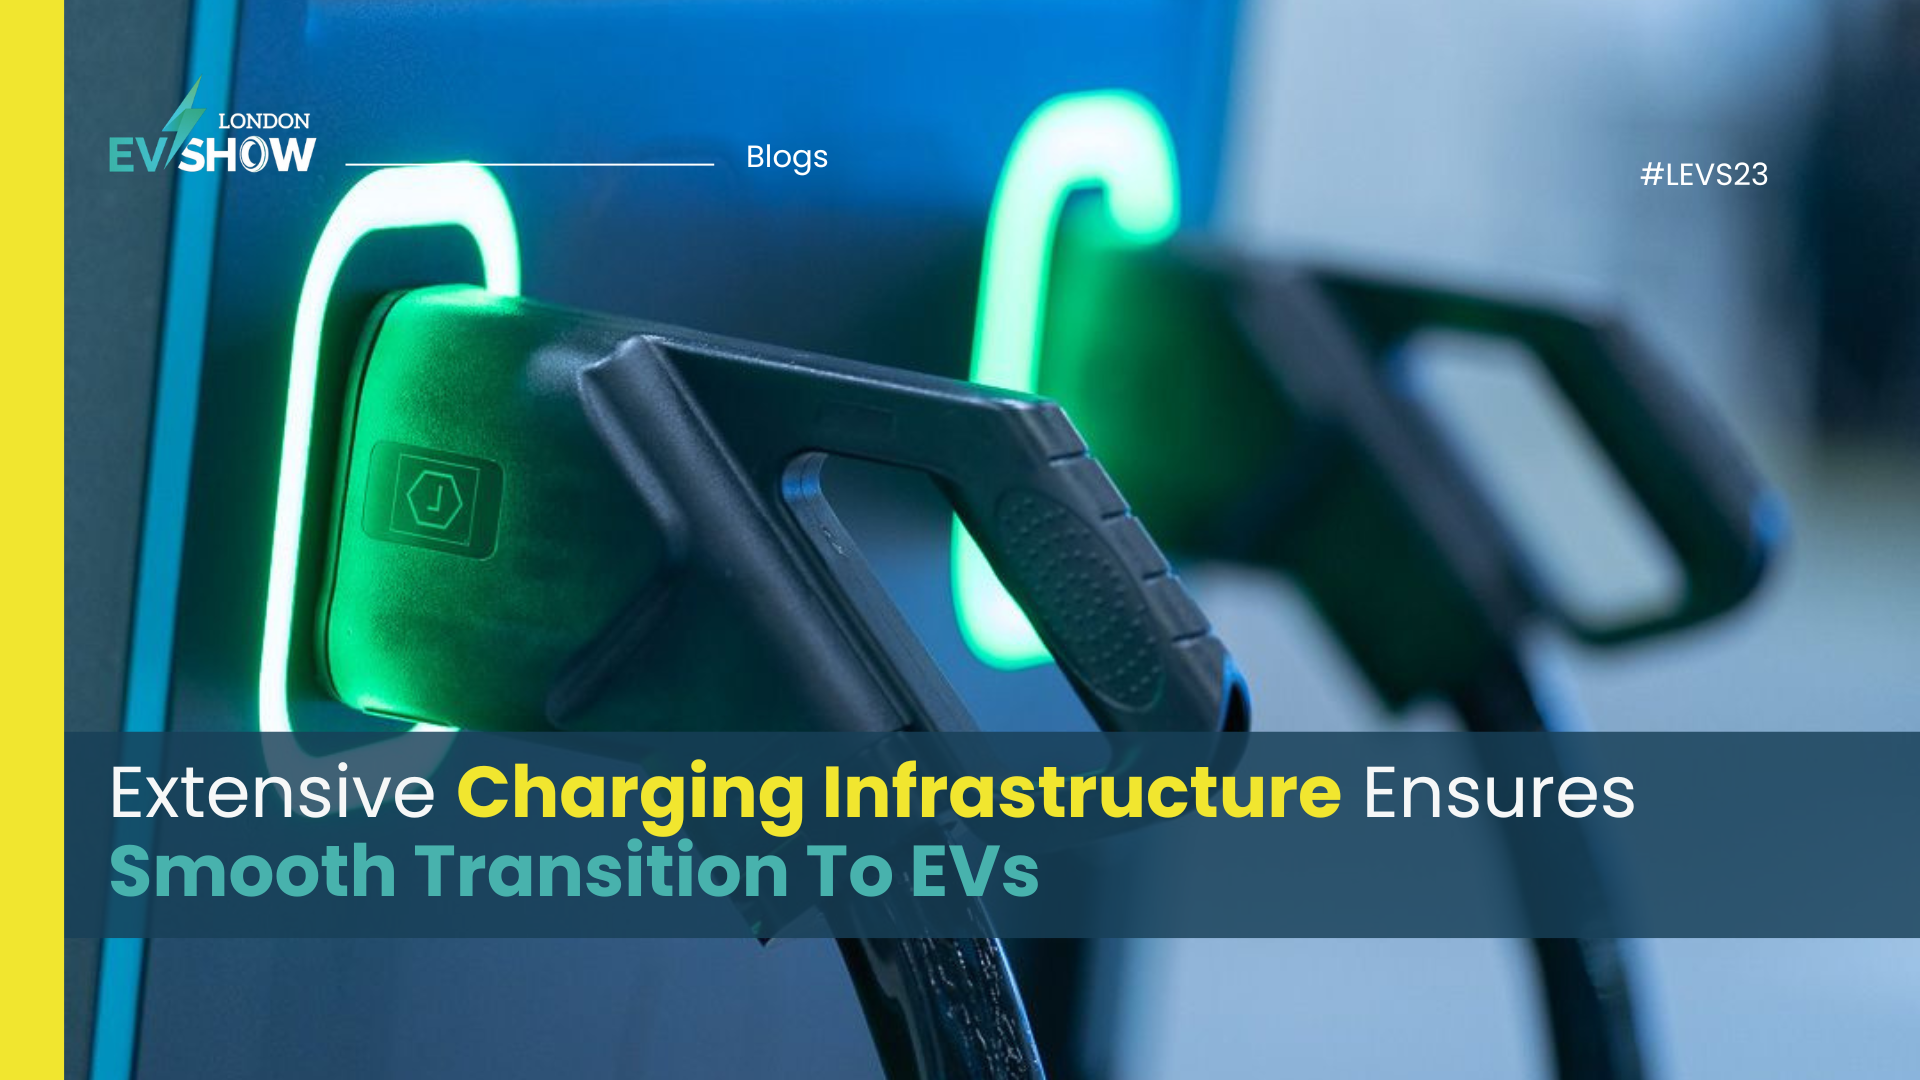 Extensive Charging Infrastructure Ensures Smooth Transition to EVs